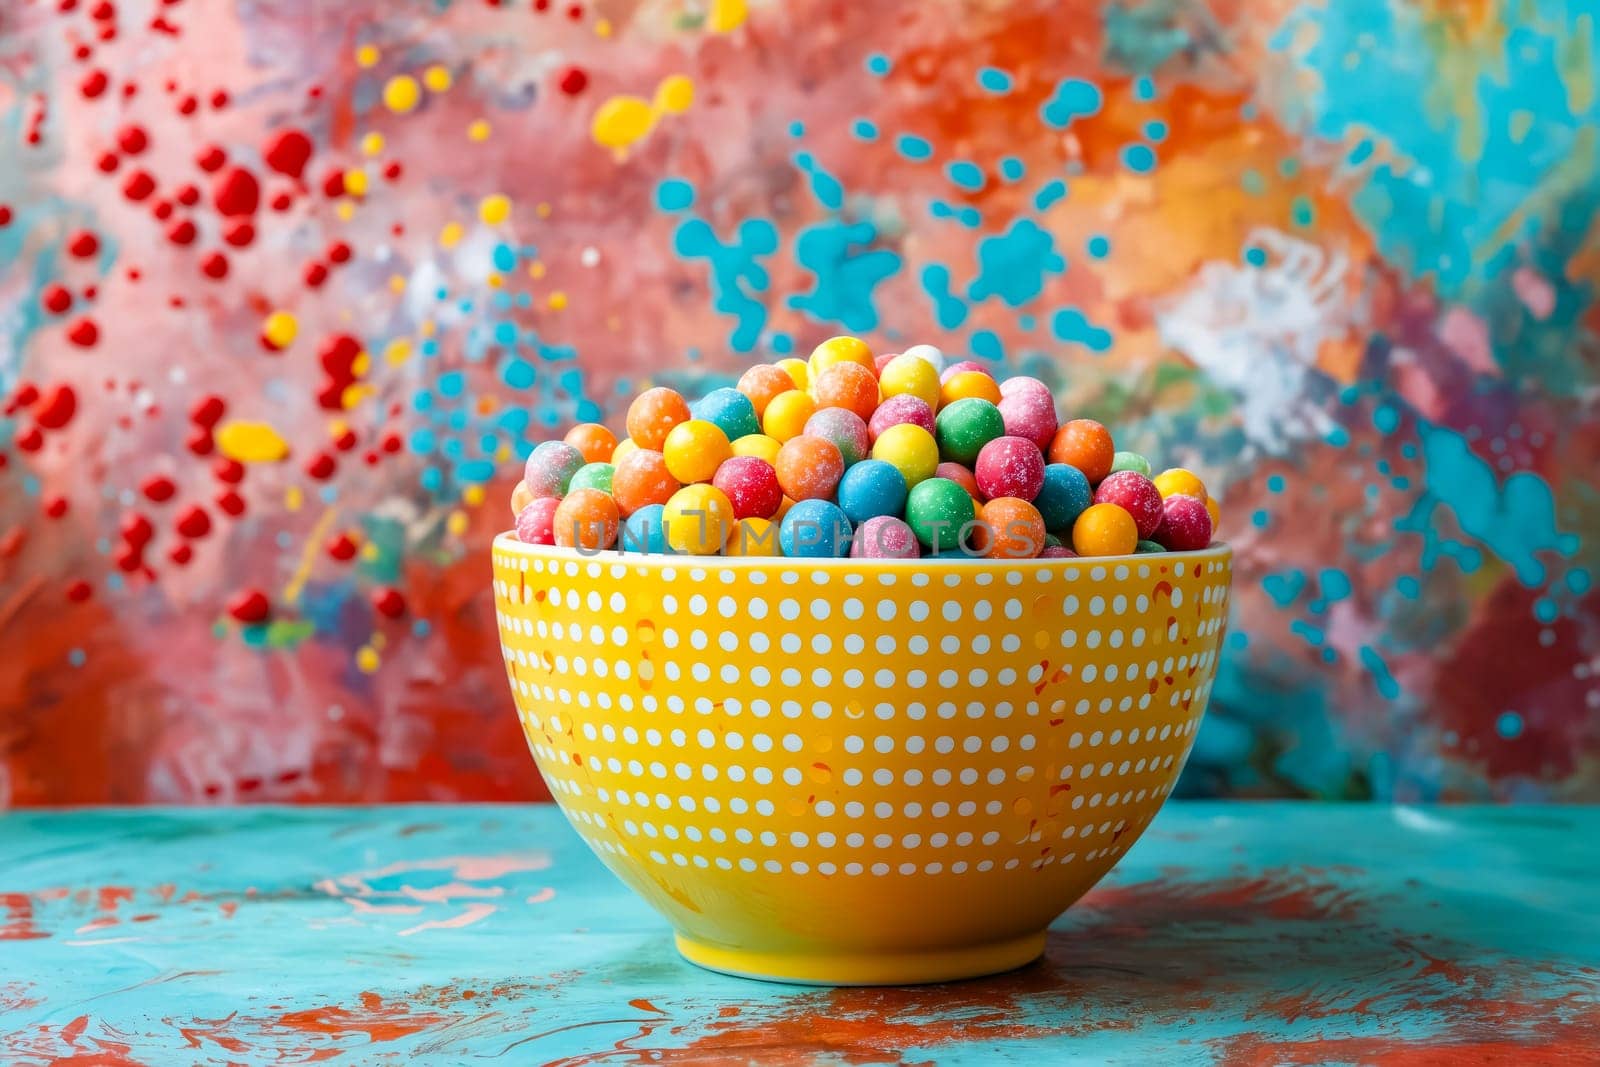 A bowl of colorful candies sits on a table. The bowl is yellow and has a polka dot pattern. The candies are of various colors and sizes, and they are scattered throughout the bowl. Generative AI